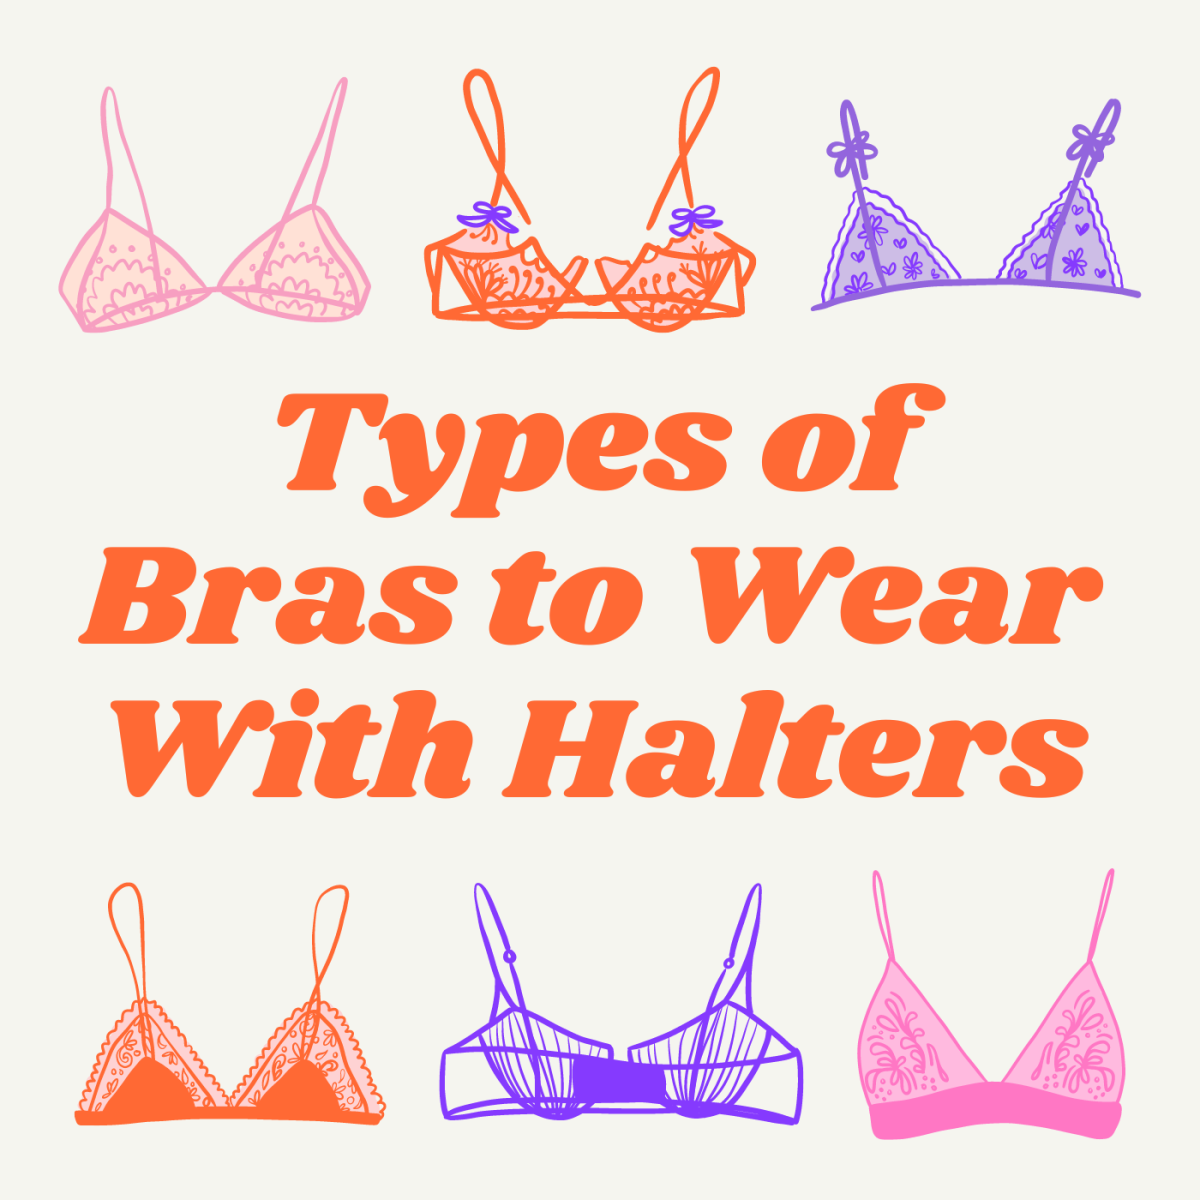 8 Types of Bras to Wear With Halter Outfits